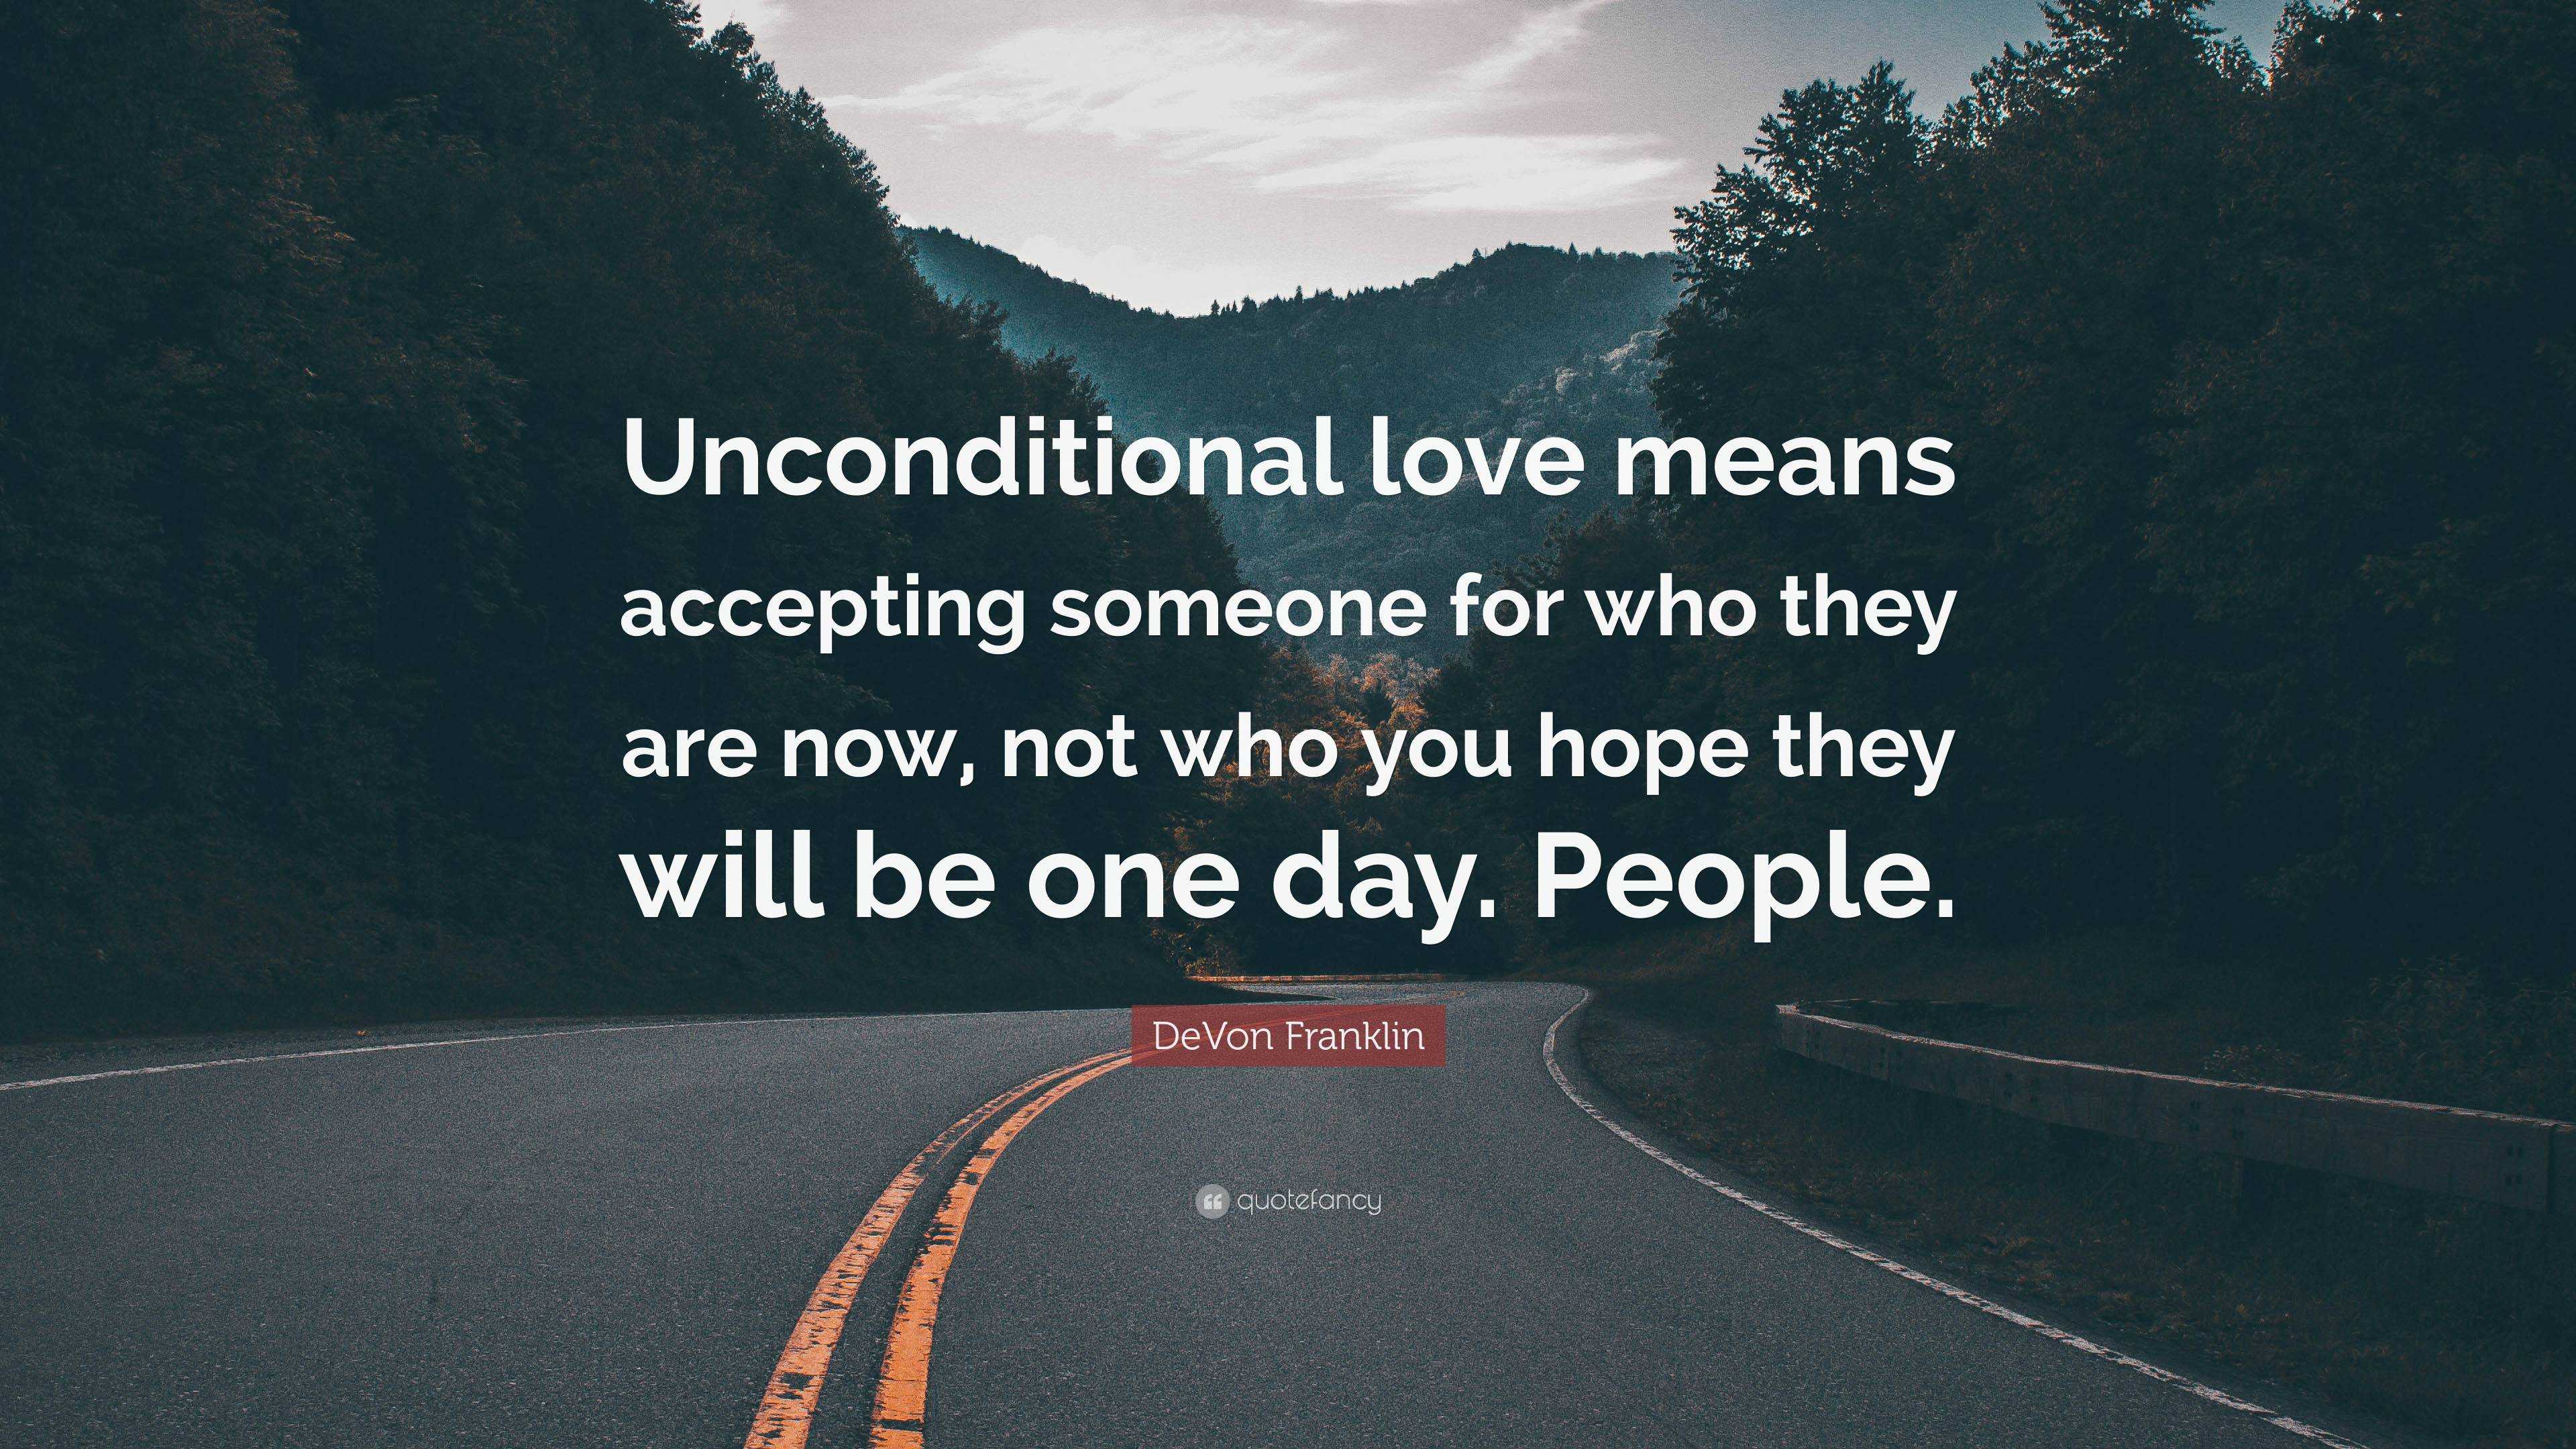 unconditional love means